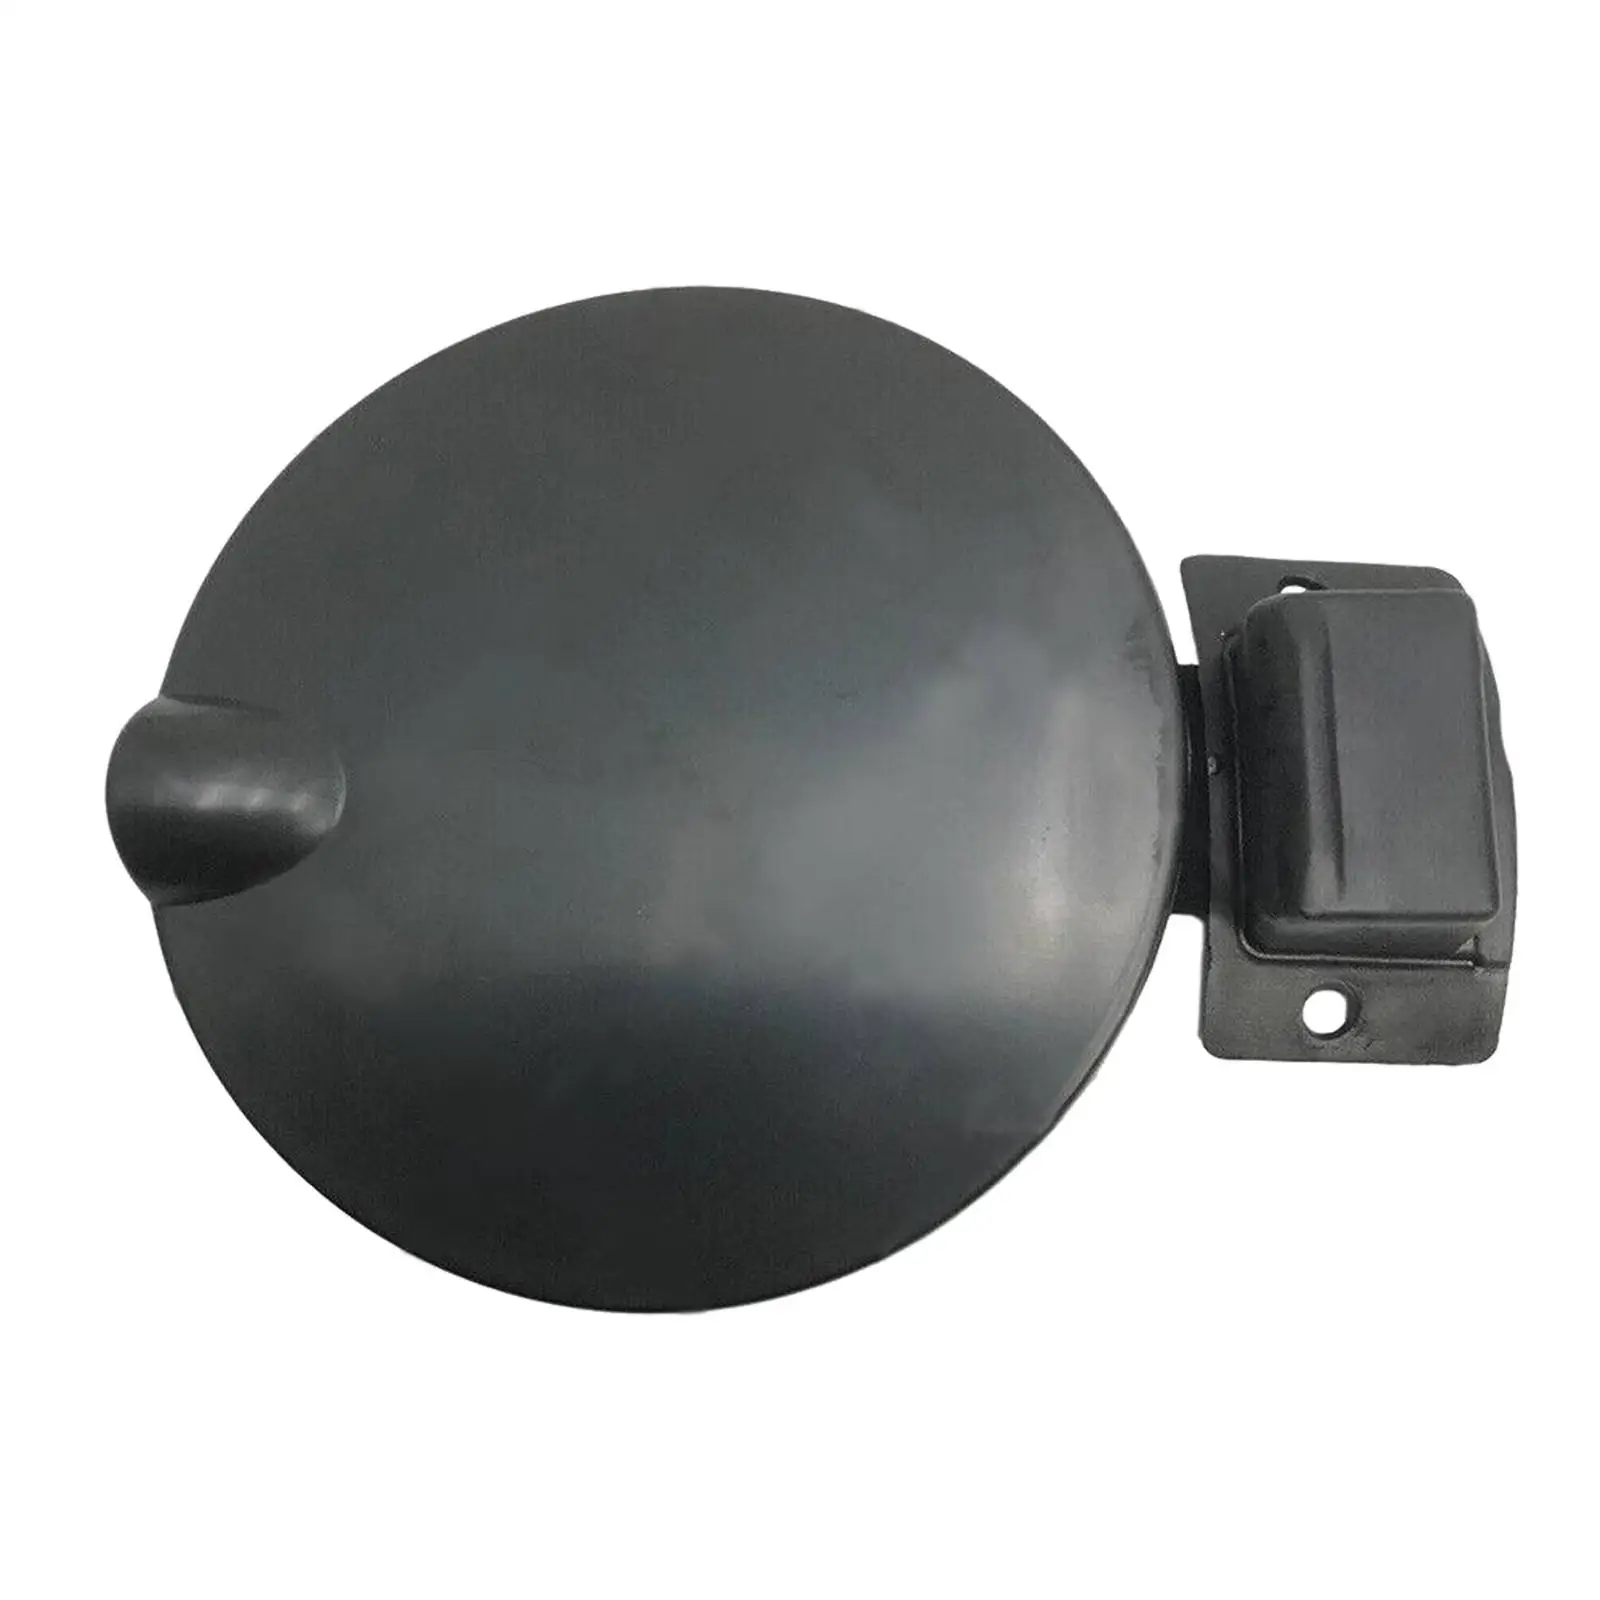 Fuel Filler Cap Gas Cap Accessories Repair for Holden 2000 to 2007 Ute Easy to Use Convenient Installation